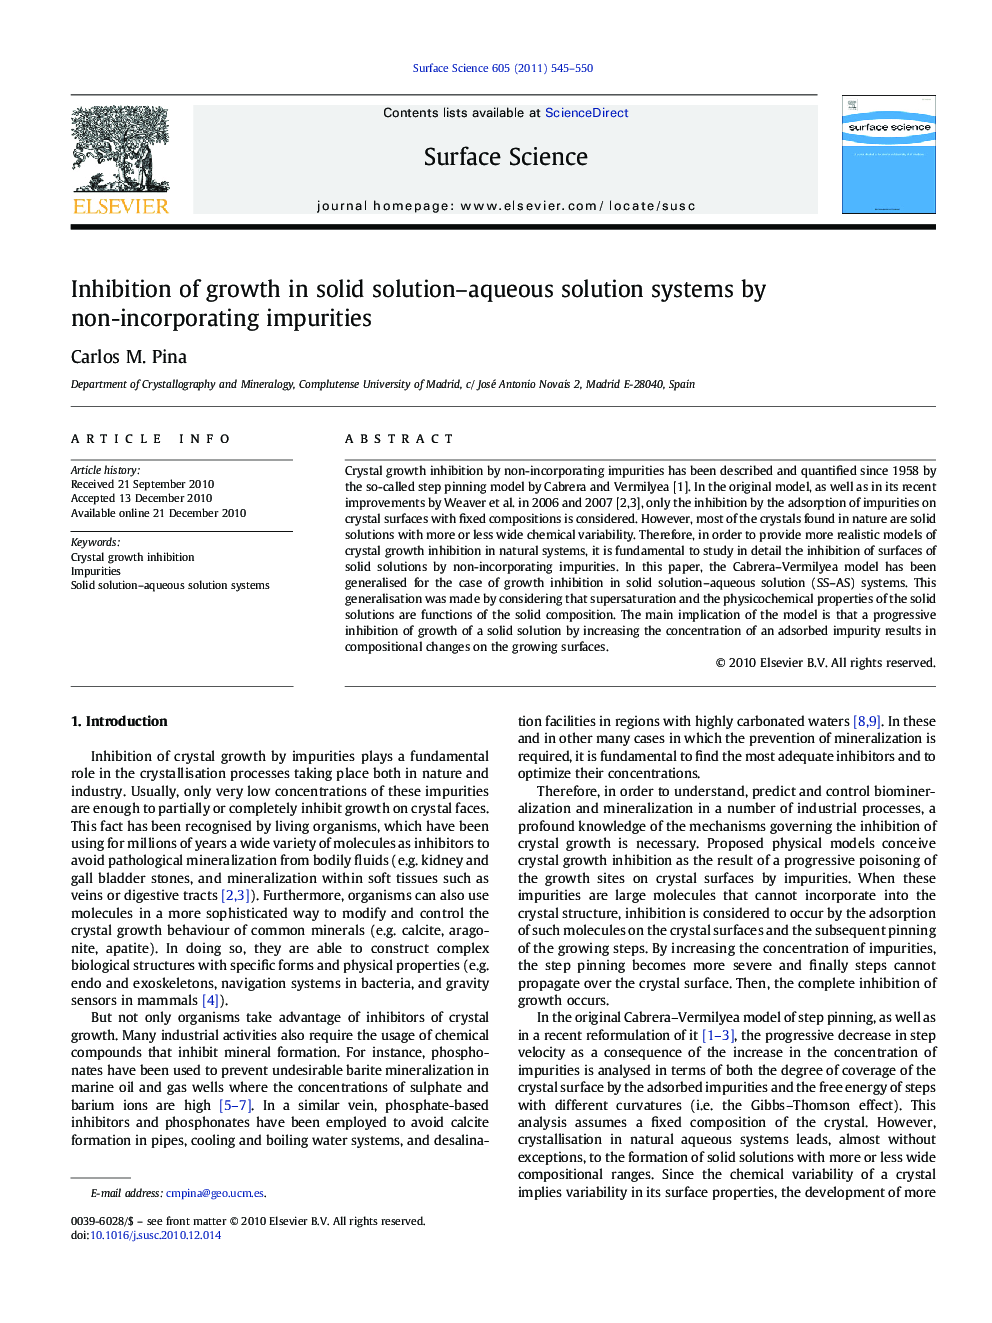 Inhibition of growth in solid solution-aqueous solution systems by non-incorporating impurities